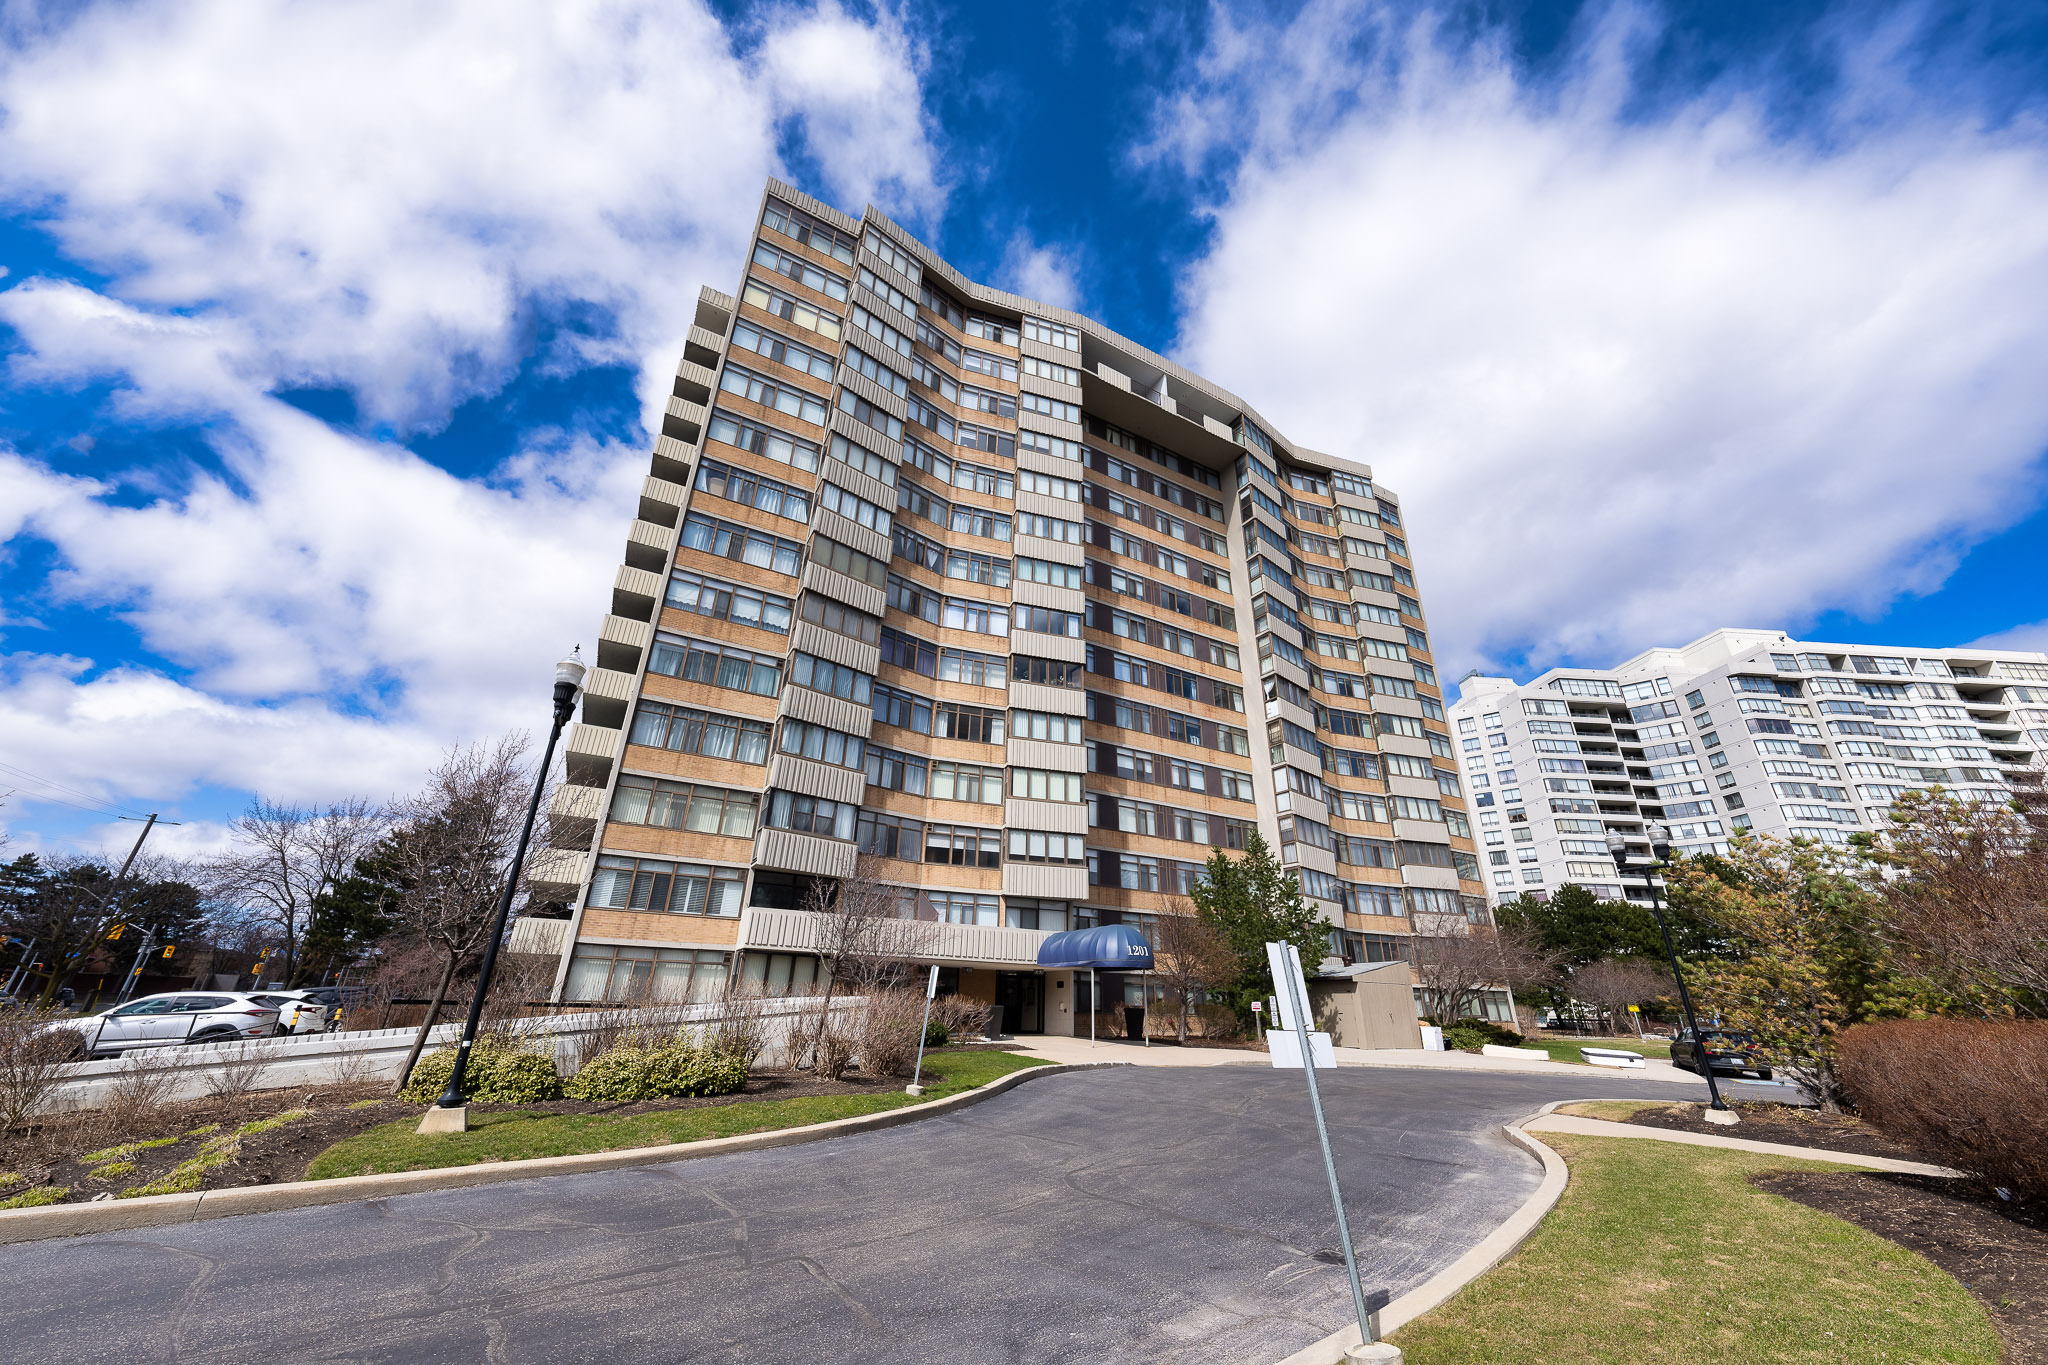 1201 Steeles Ave W, North York, ON M2R 3K1, Canada Photo 11